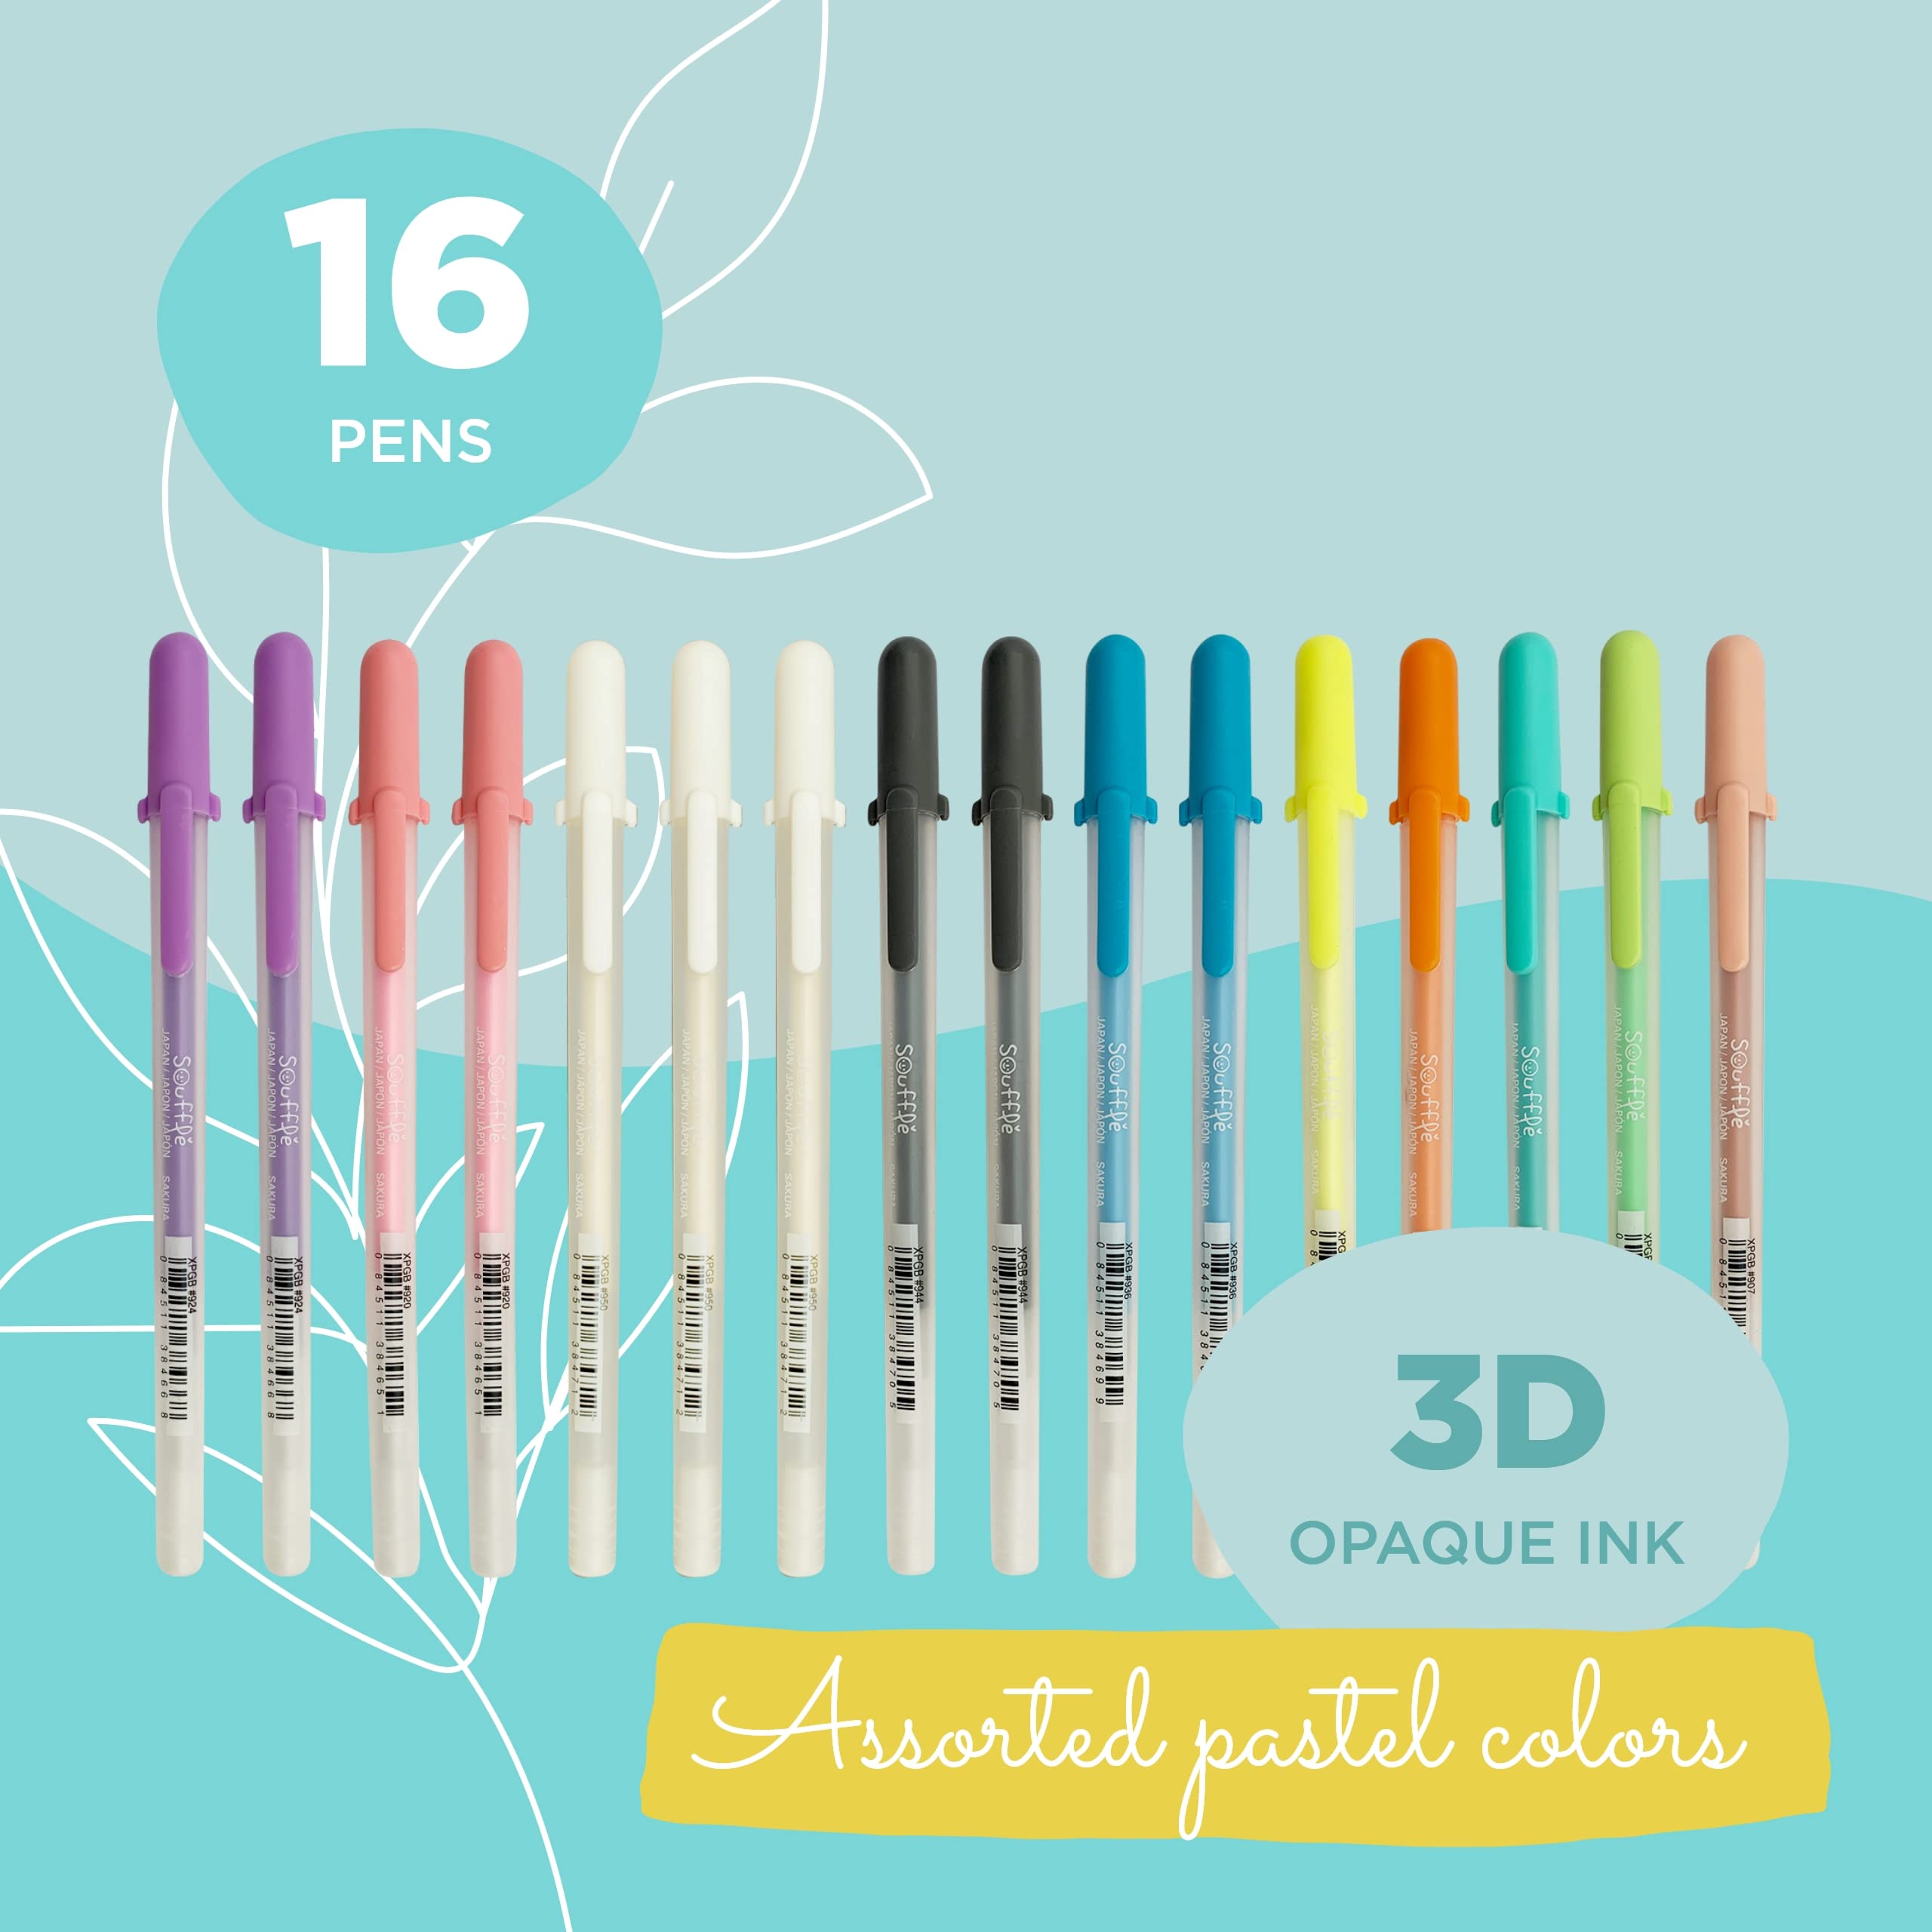 SAKURA 3D Soufflé Pen - 3-D Pen for Lettering, Drawing, Line Borders, Ornaments, & More - Opaque White and Pastel Ink Colors - 16 Pack